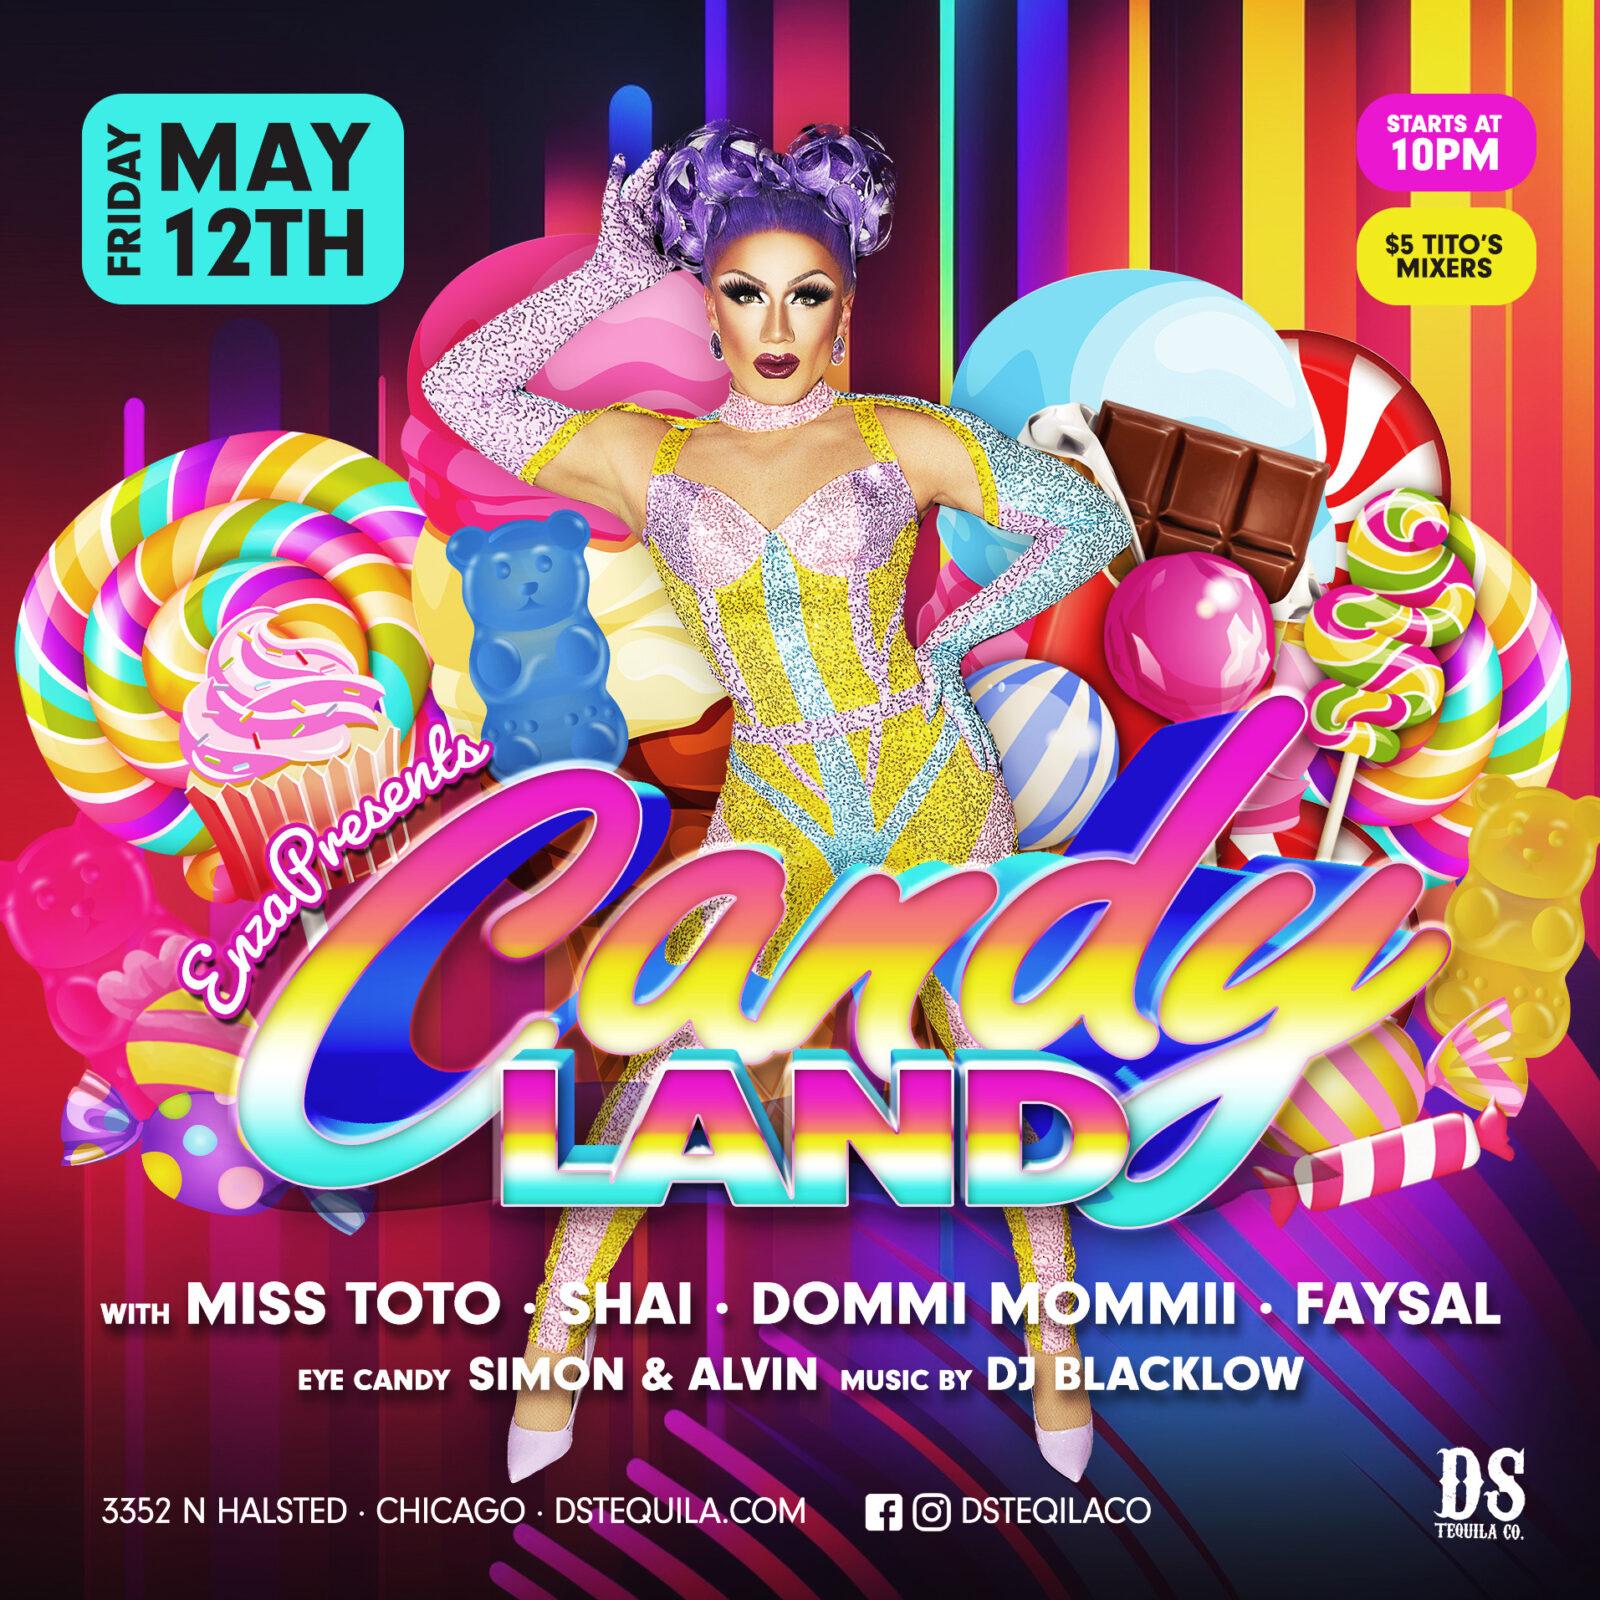 Candyland Presented By Enza ⋆ D.S. Tequila Co.